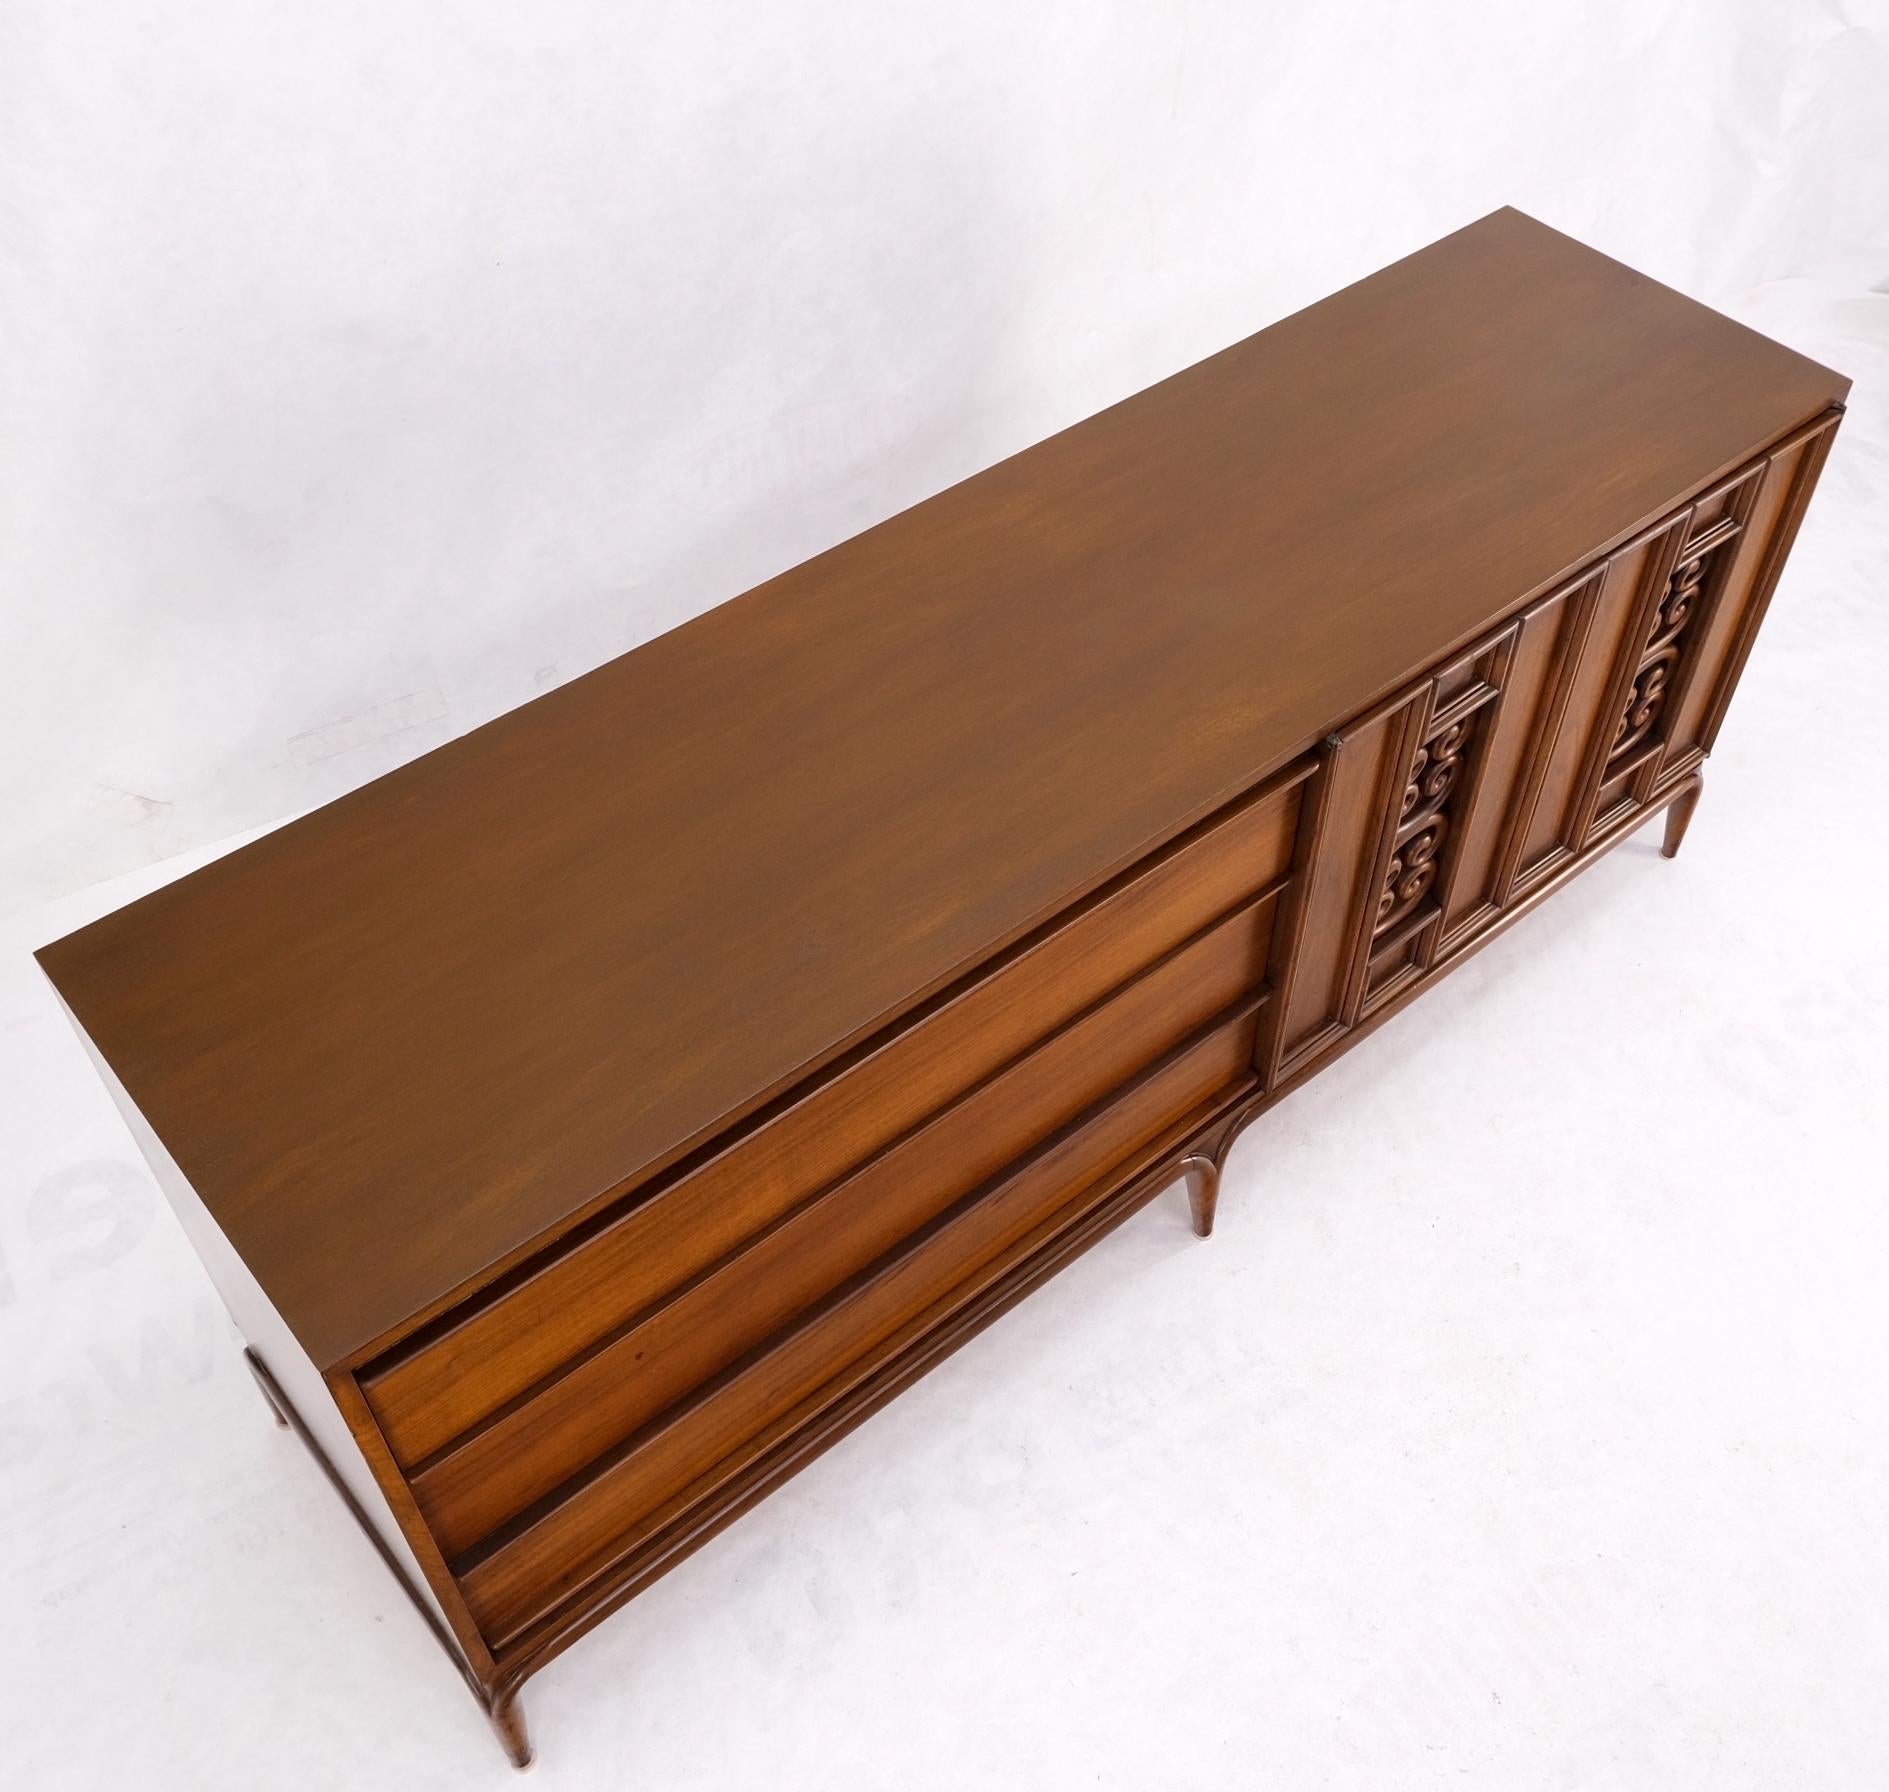 Danish Mid-Century Walnut 6 Drawers Long Credenza Dresser w/ Carved Double Doors For Sale 7